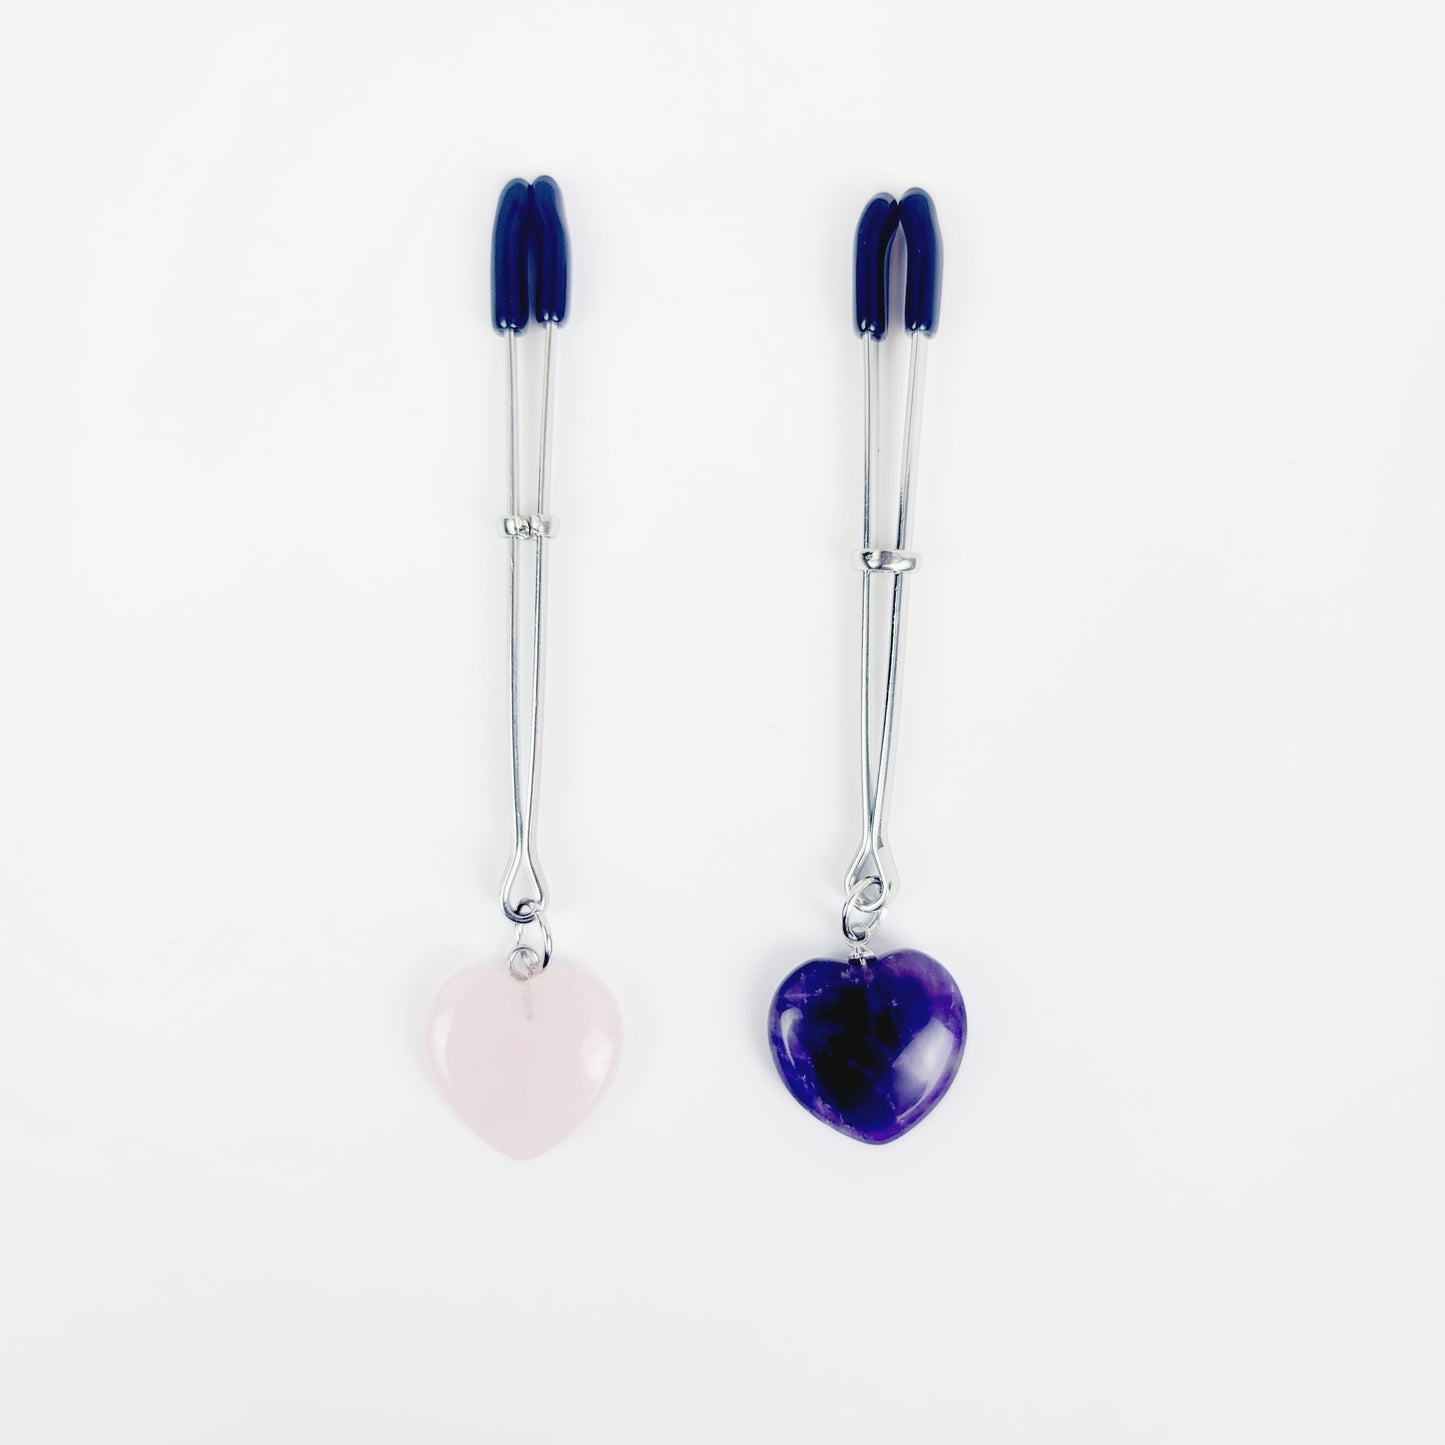 Non Piercing Intimate Jewelry Set for Couple. Nipple Chain on Nooses or Clamps, Tweezer Clit Clamp, and Penis Chain Noose with Heart